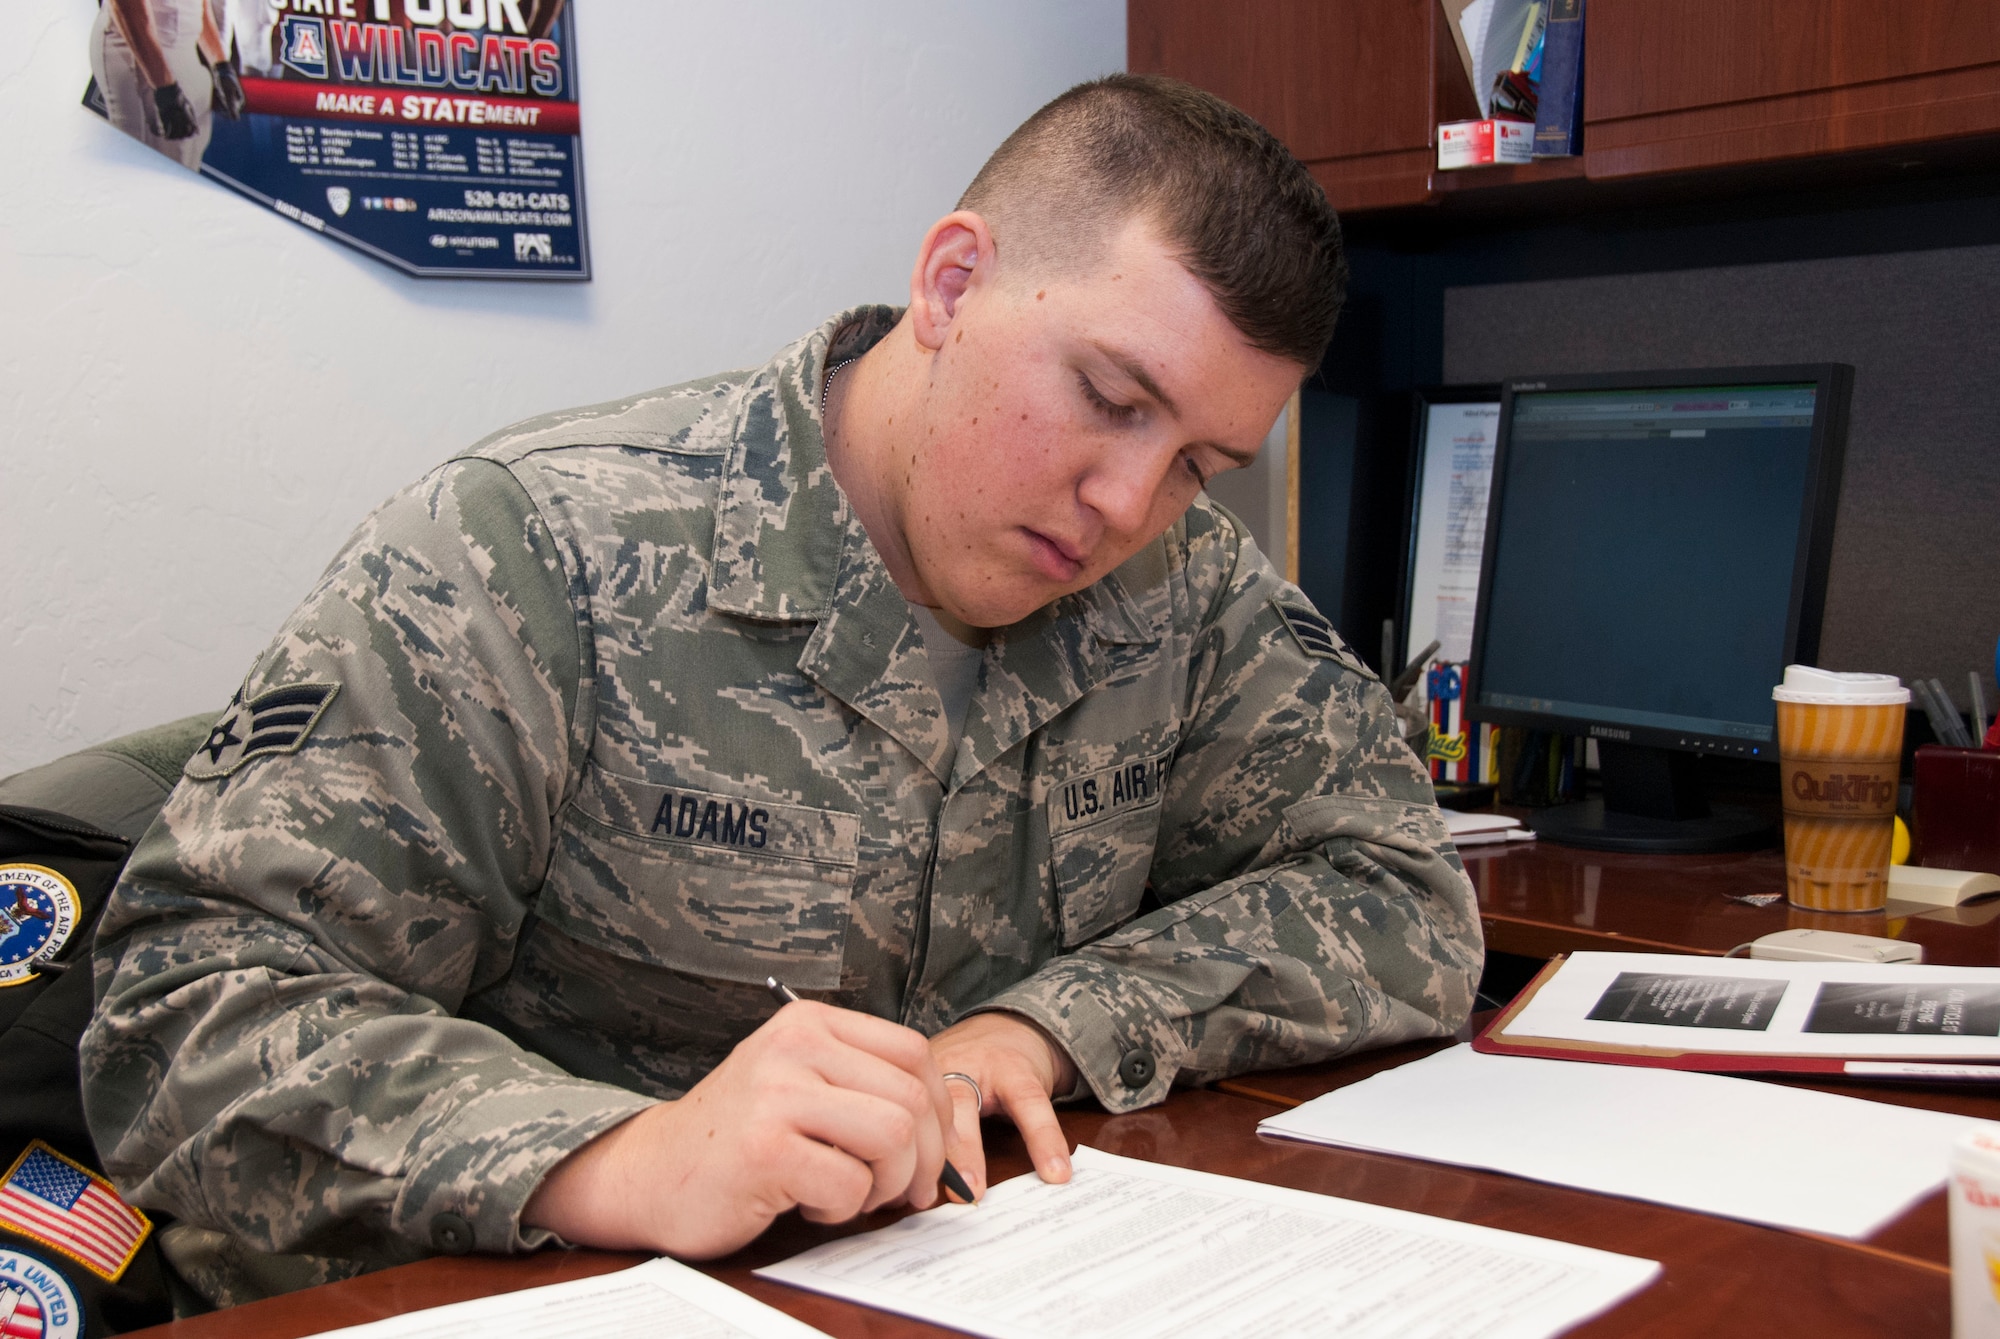 Senior Airman Bryan Adams, a paralegal specialist with the 162nd Fighter Wing’s Judge Advocate General, reviews documents in the legal office. The JAG Corps here assists Air Guard personnel by meeting their pre-deployment legal needs while serving in a direct support function to the wing commander. Though JAG is not permitted to provide advice on criminal or certain civil matters, the 162nd Fighter Wing’s legal support team highly encourages Airmen to visit their office so they can steer them in the right direction by providing referrals. (U.S. Air National Guard photo by Staff Sgt. Erich B. Smith/Released)